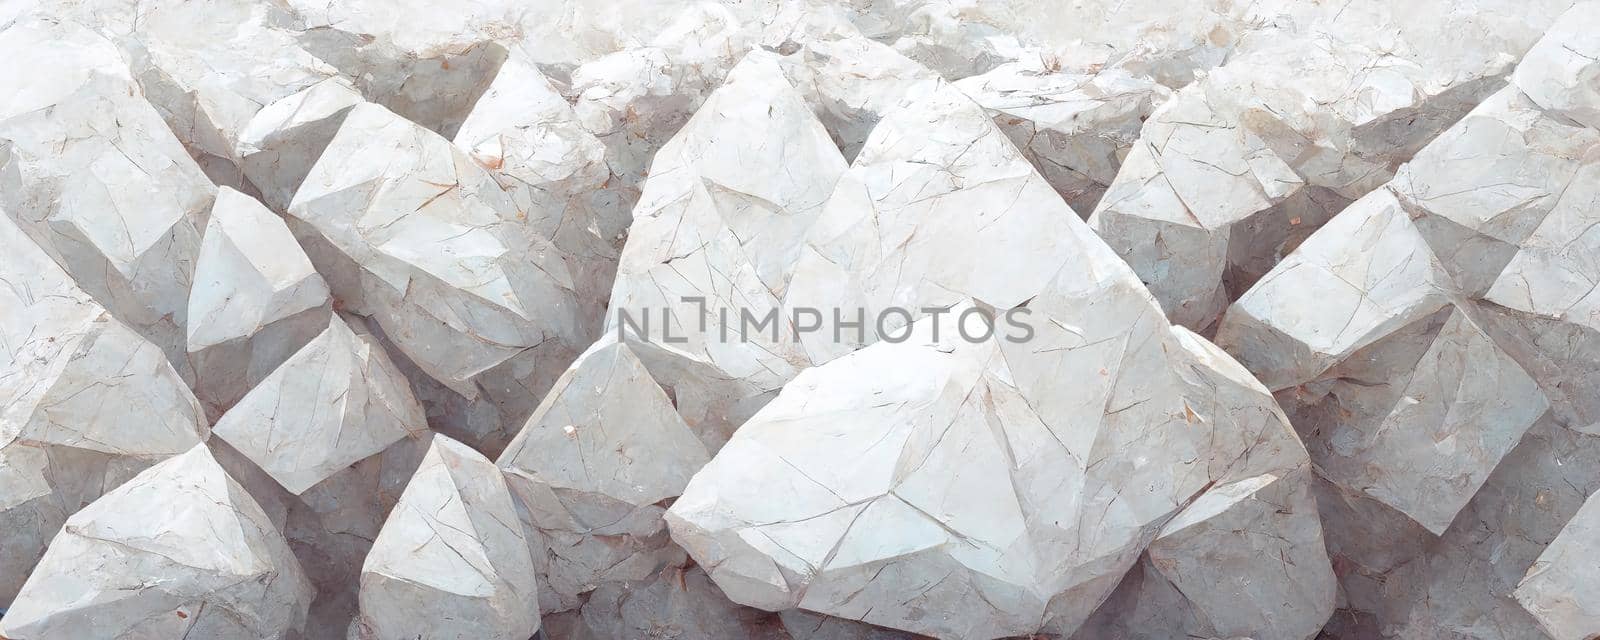 the background is made of polygons in White milky color imitating stones.